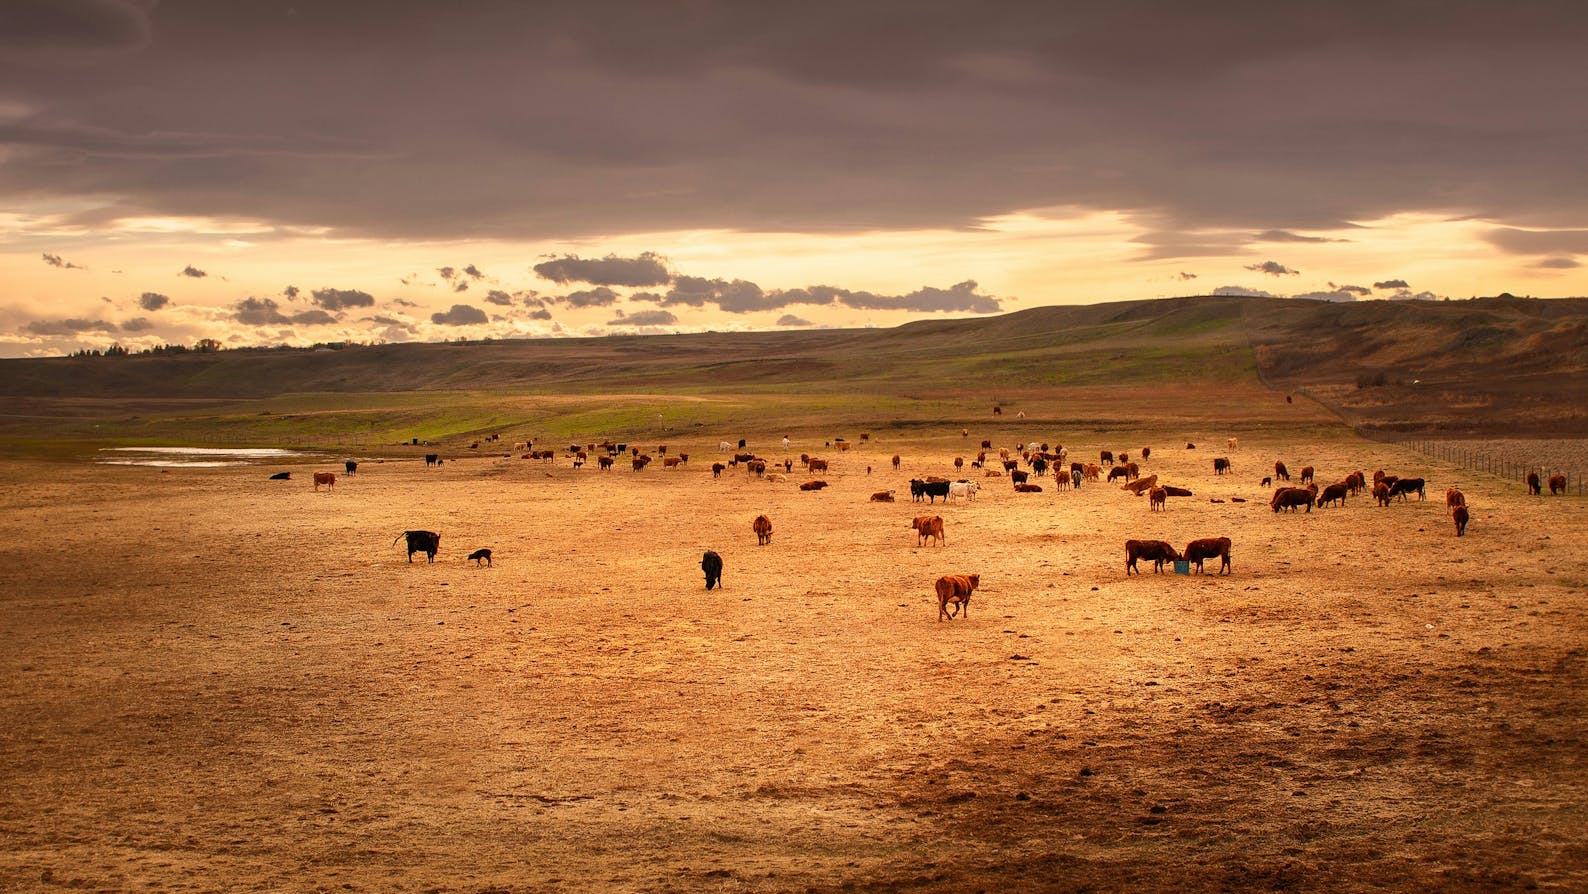 A herd of cattle standing on top of a dry grass field